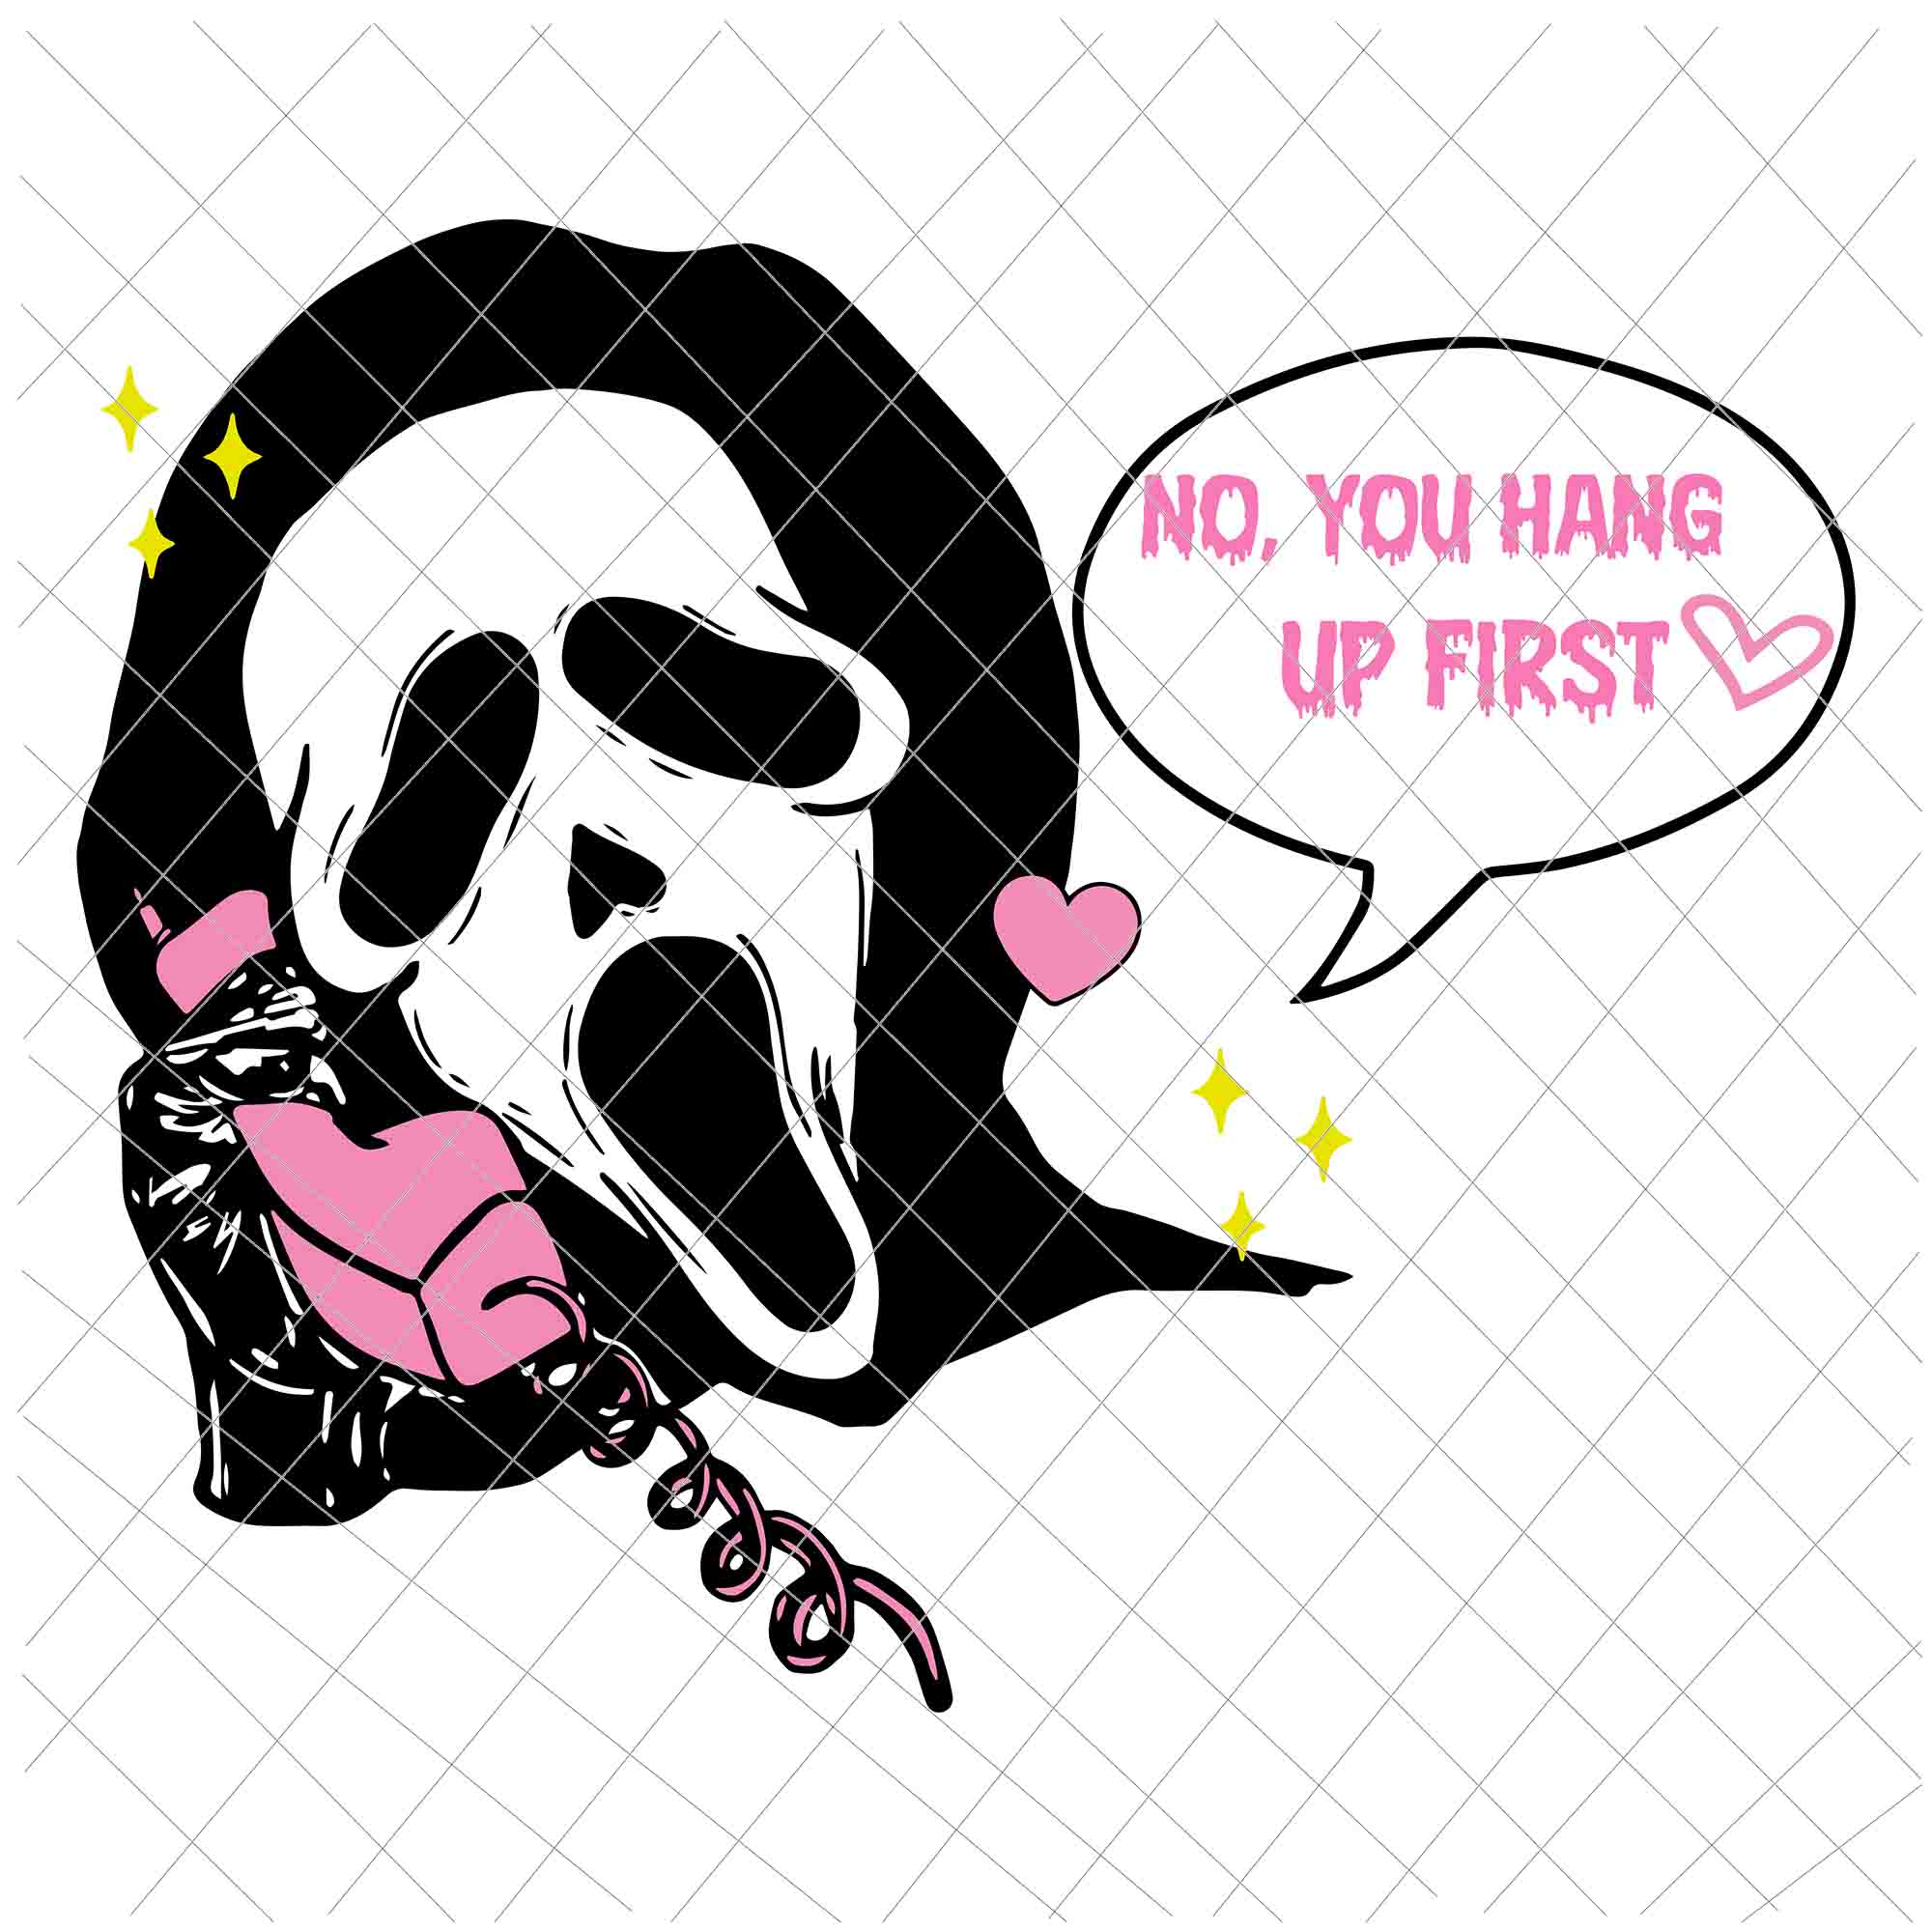 Ghostface Calling Halloween Funny Svg, No, Can I Help You Svg, Scream You Hang Up Svg, Funny Call Center Halloween Svg